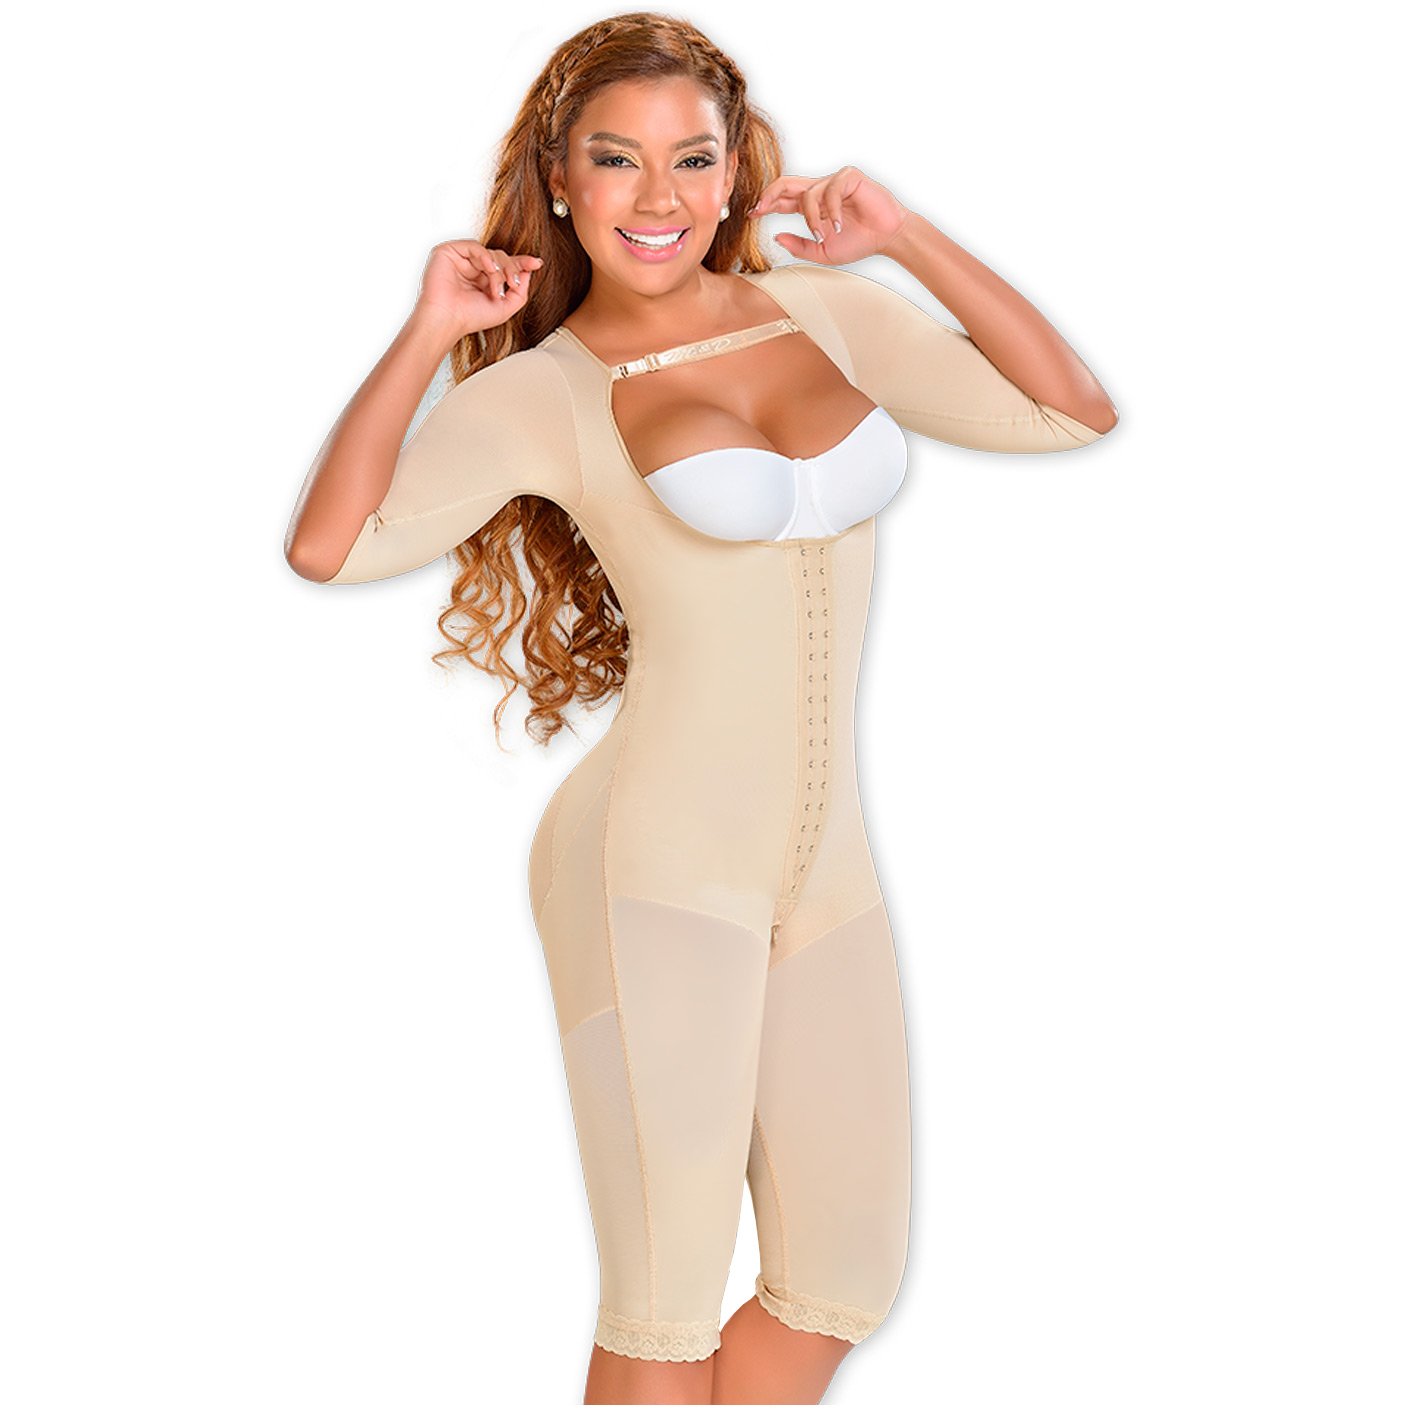 BODY SHAPER WITH SLEEVES